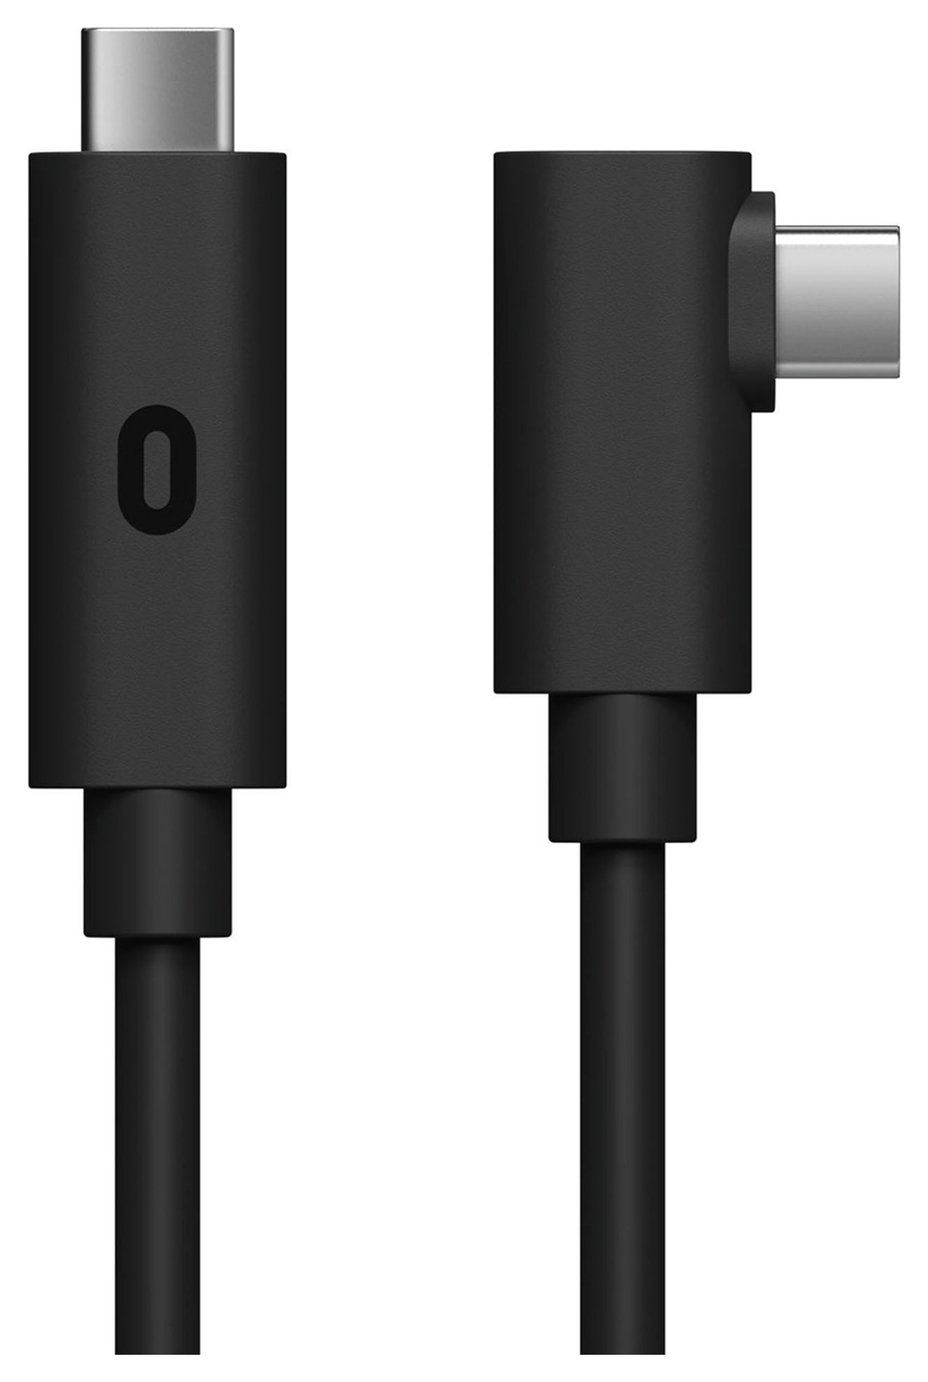 Meta Quest USB-C Link Cable